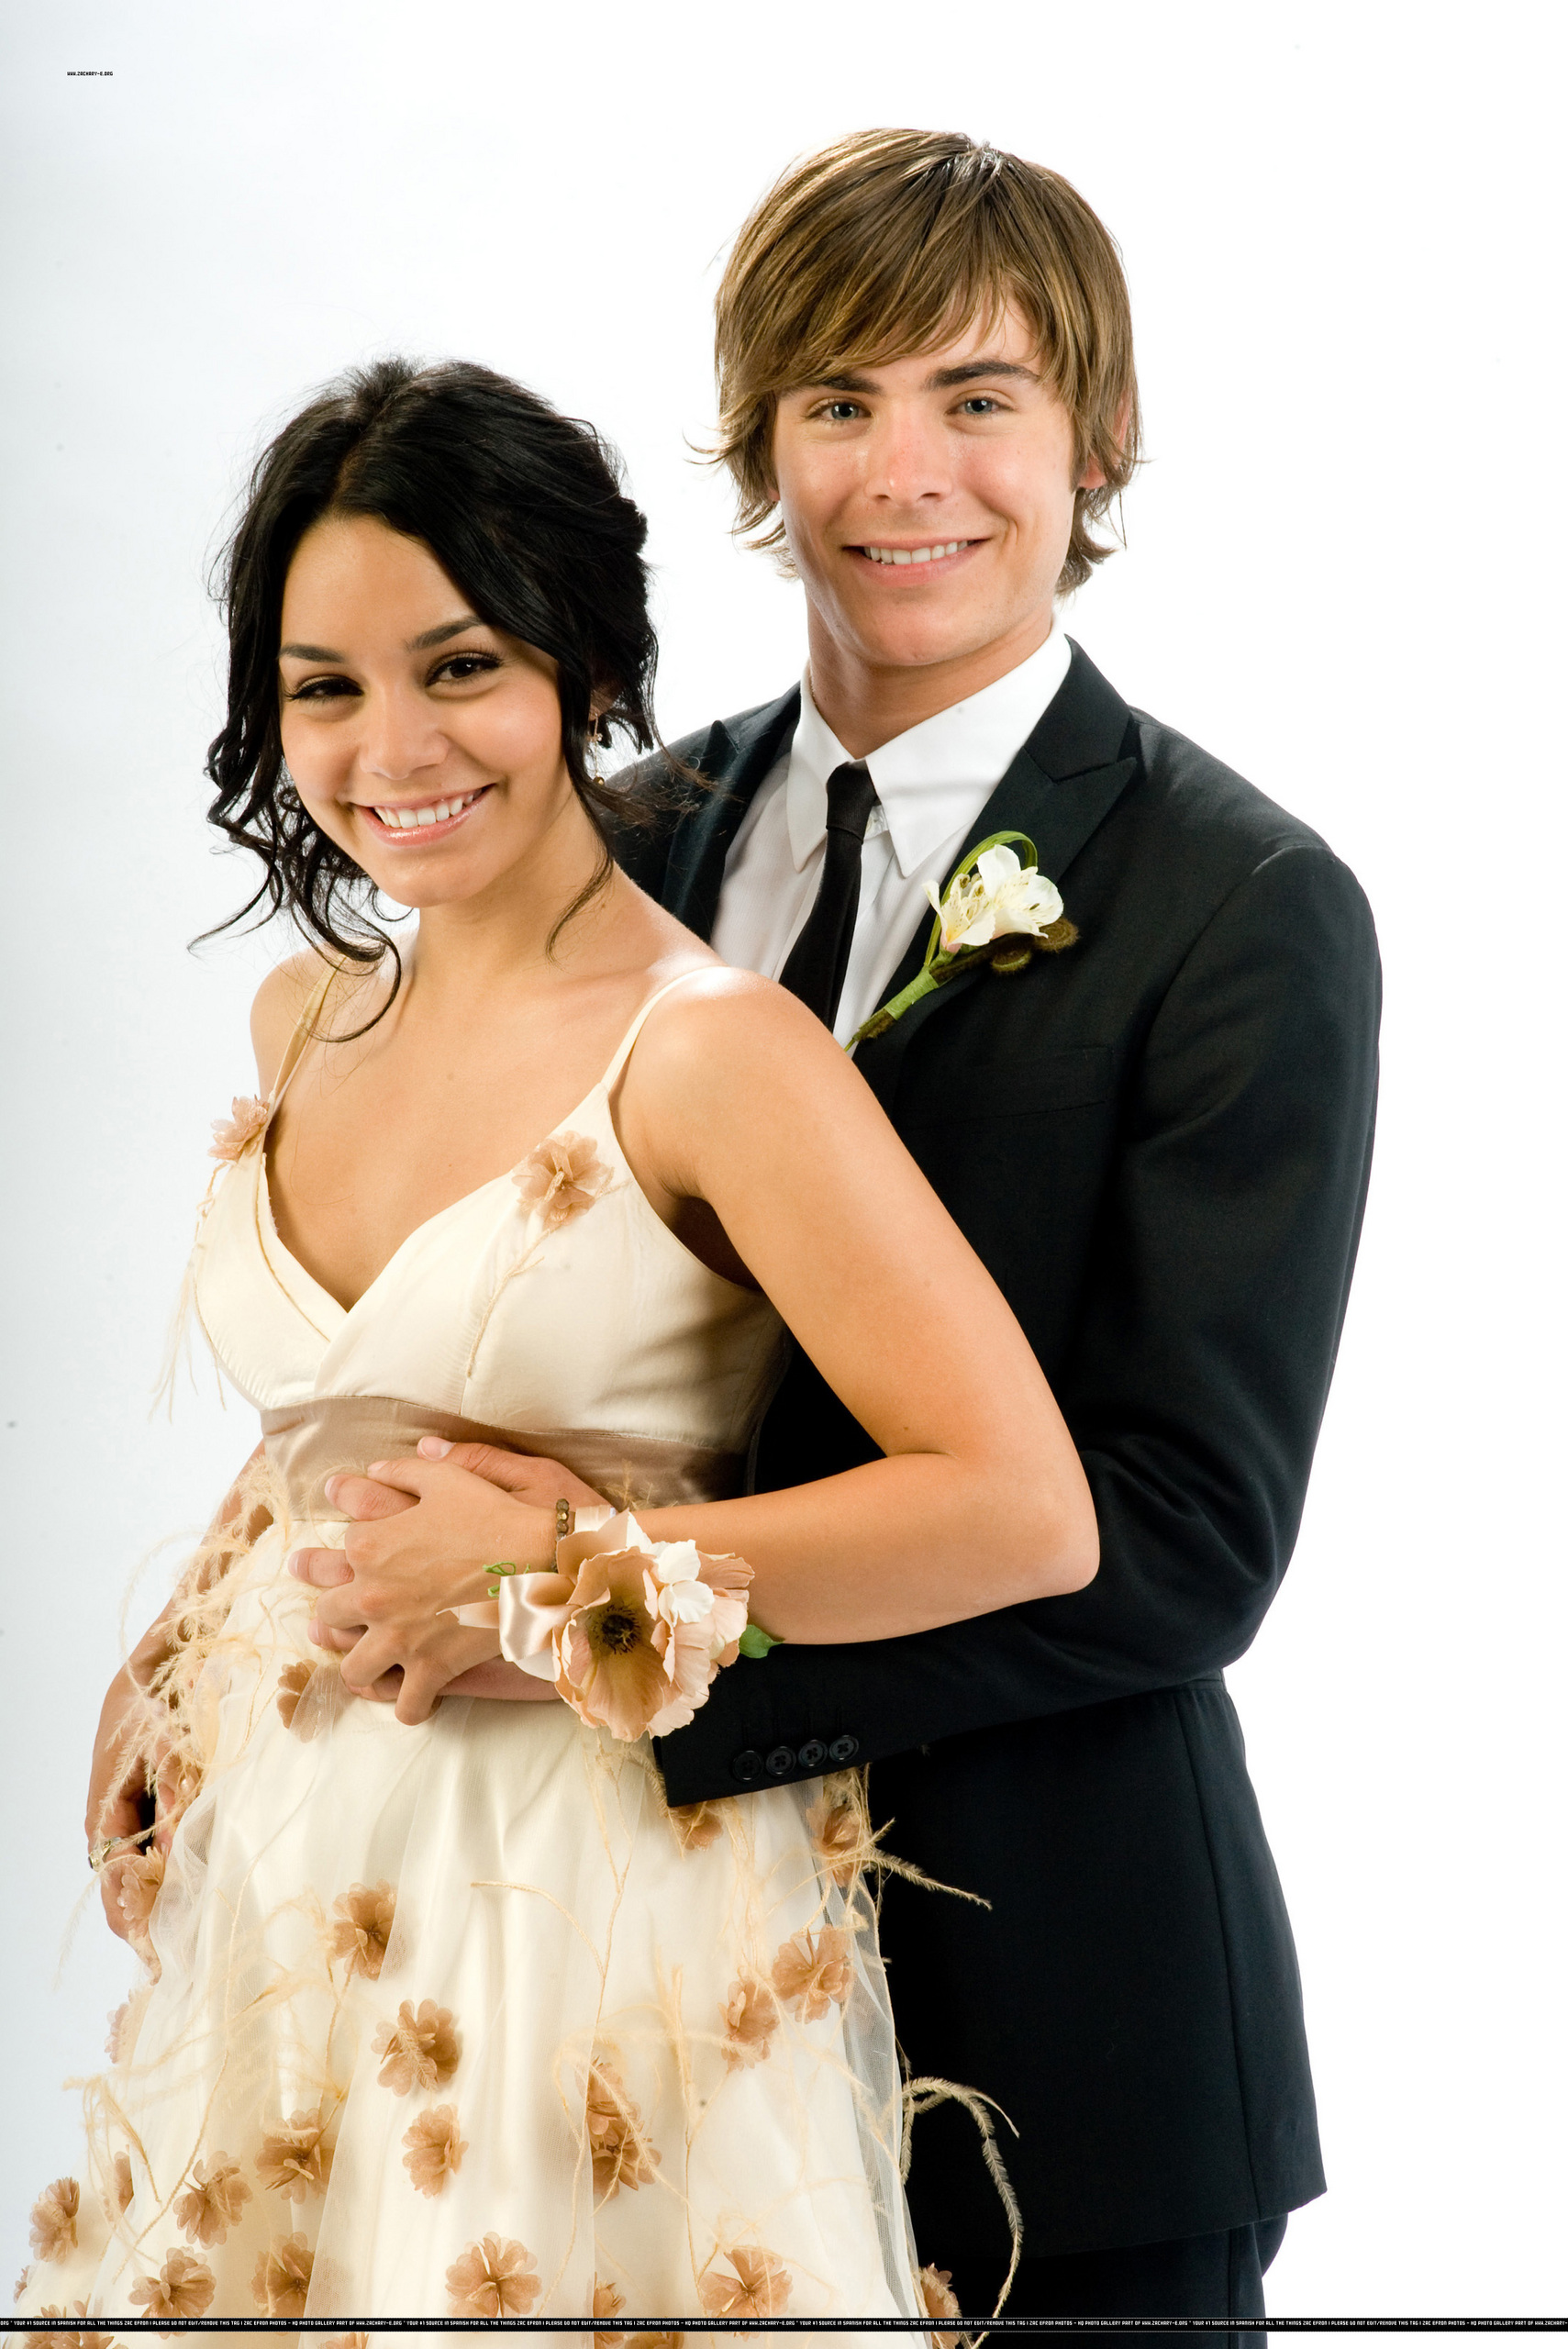 Who Is Vanessa Hudgens Married To? Discover The Lucky Man Who Stole Her Heart!